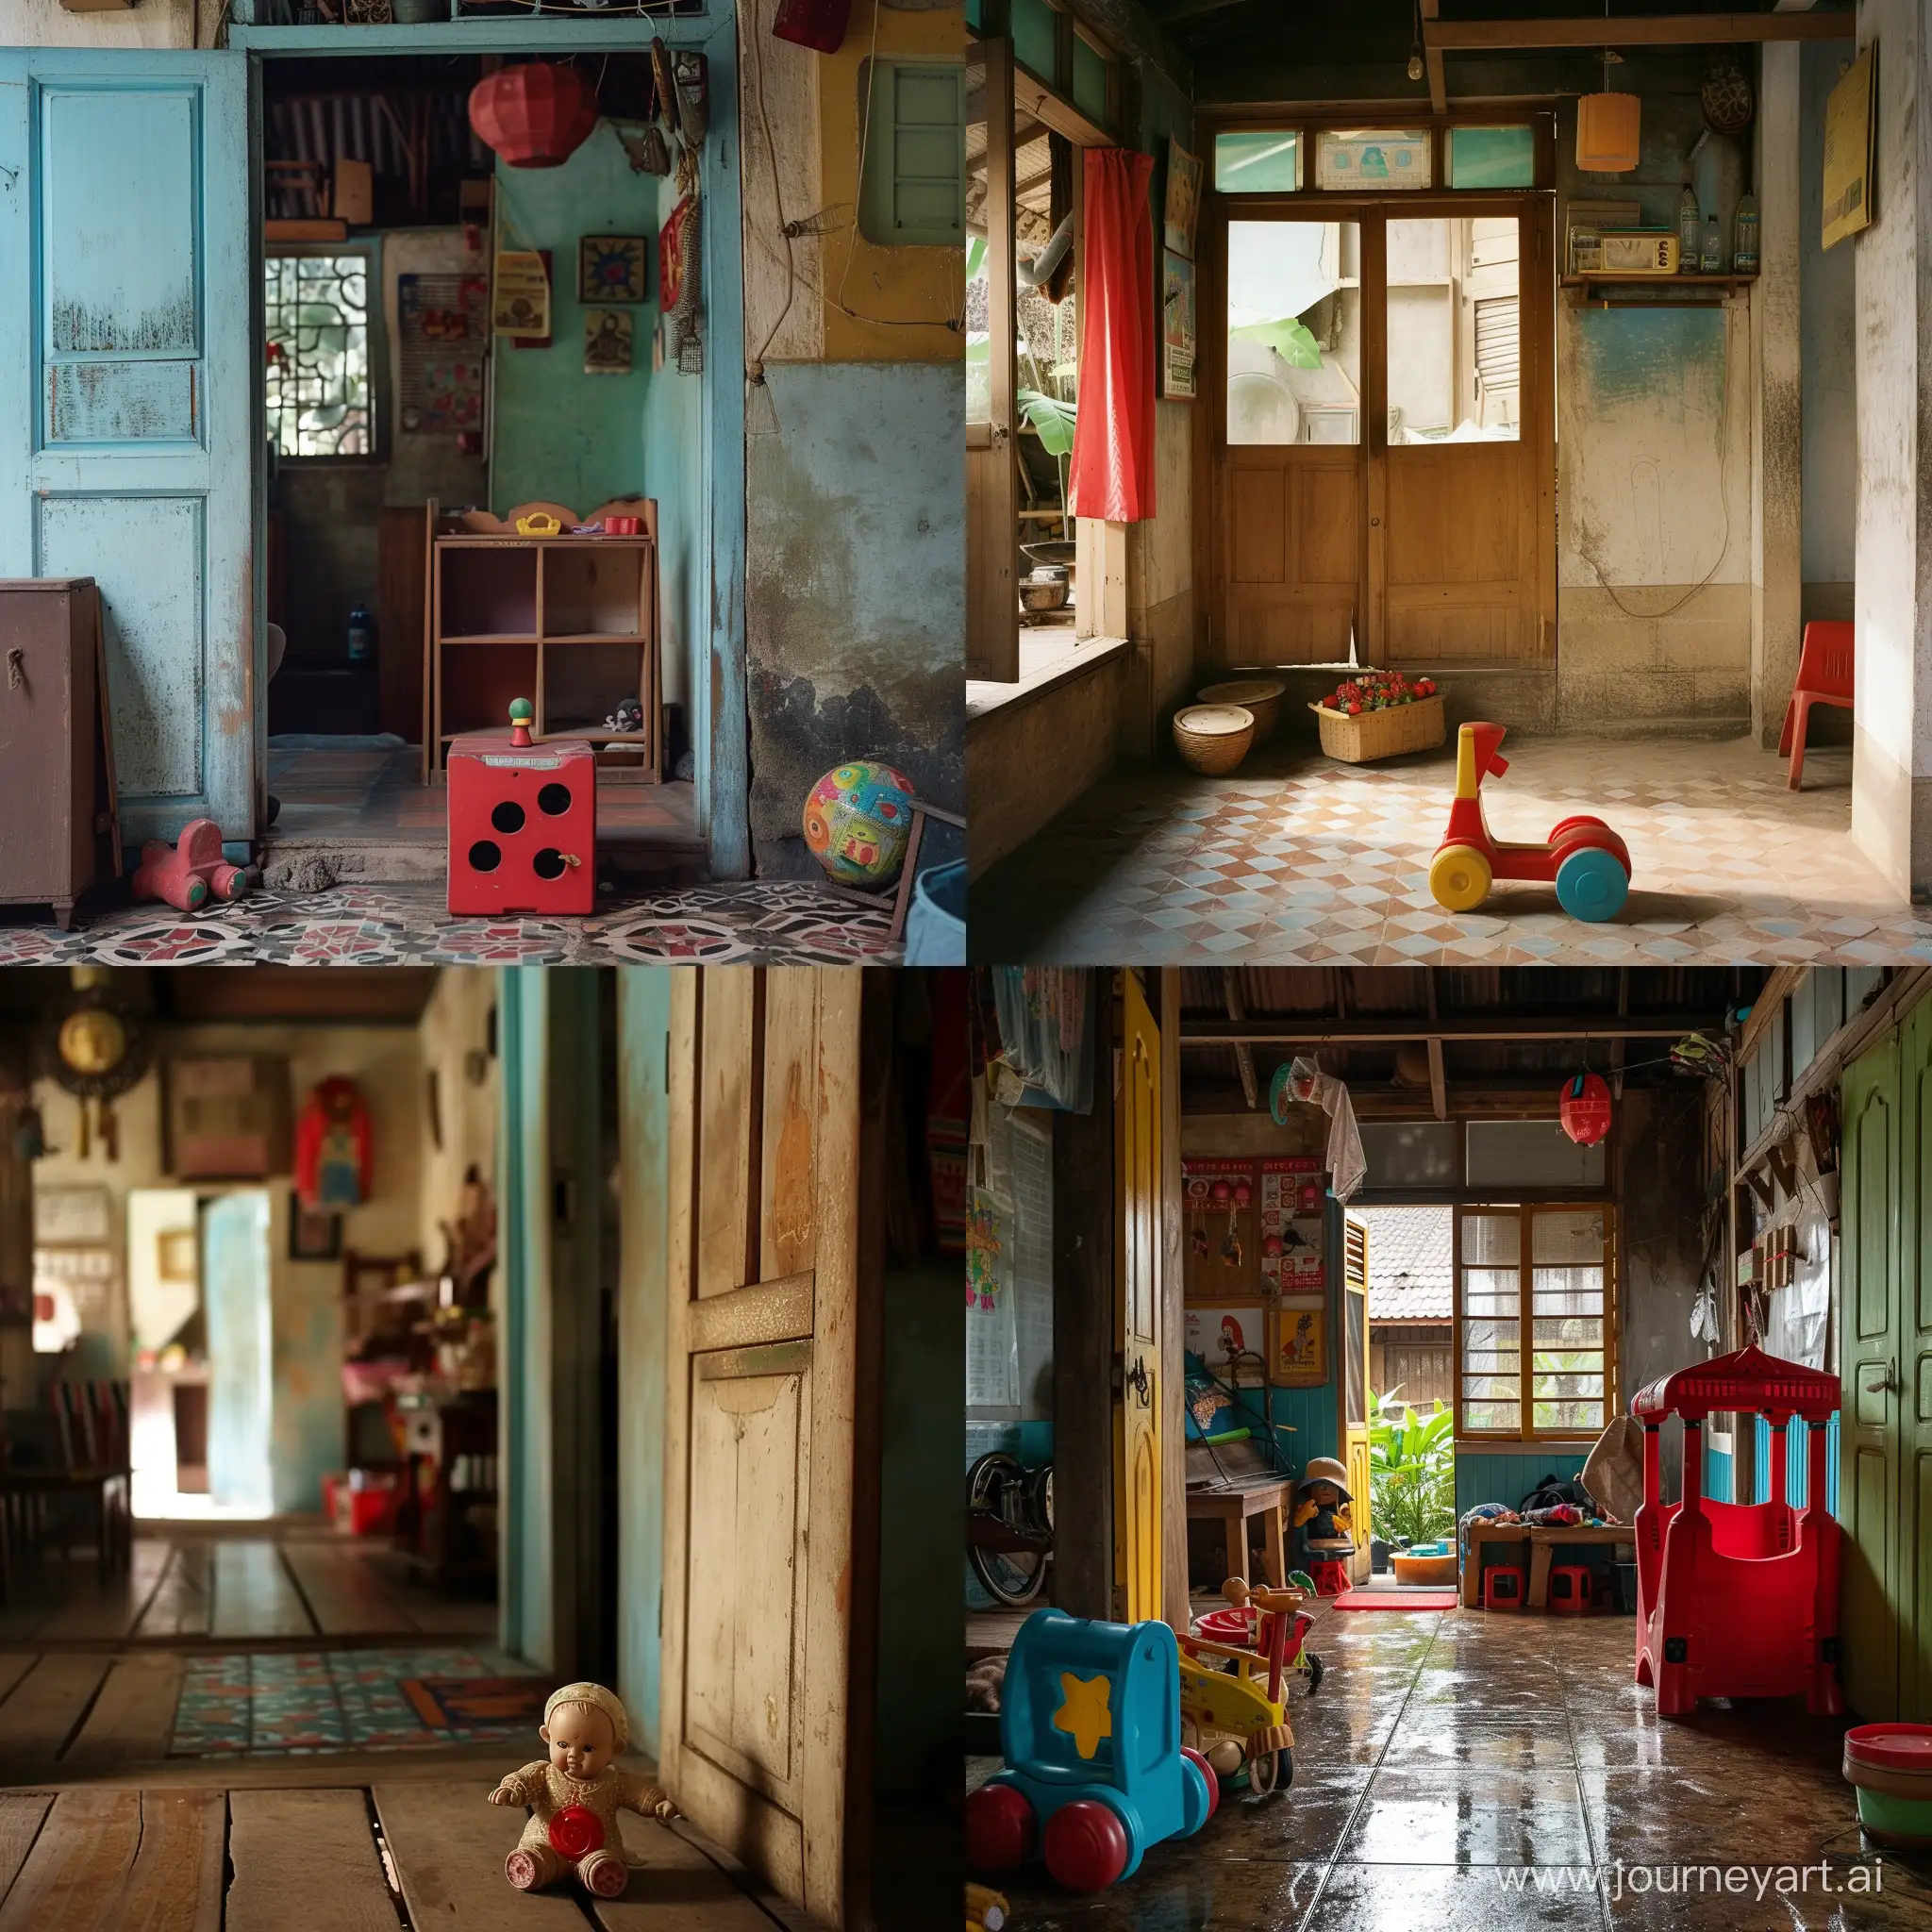 Traditional-Indonesian-Toy-in-a-Vibrant-Household-Setting